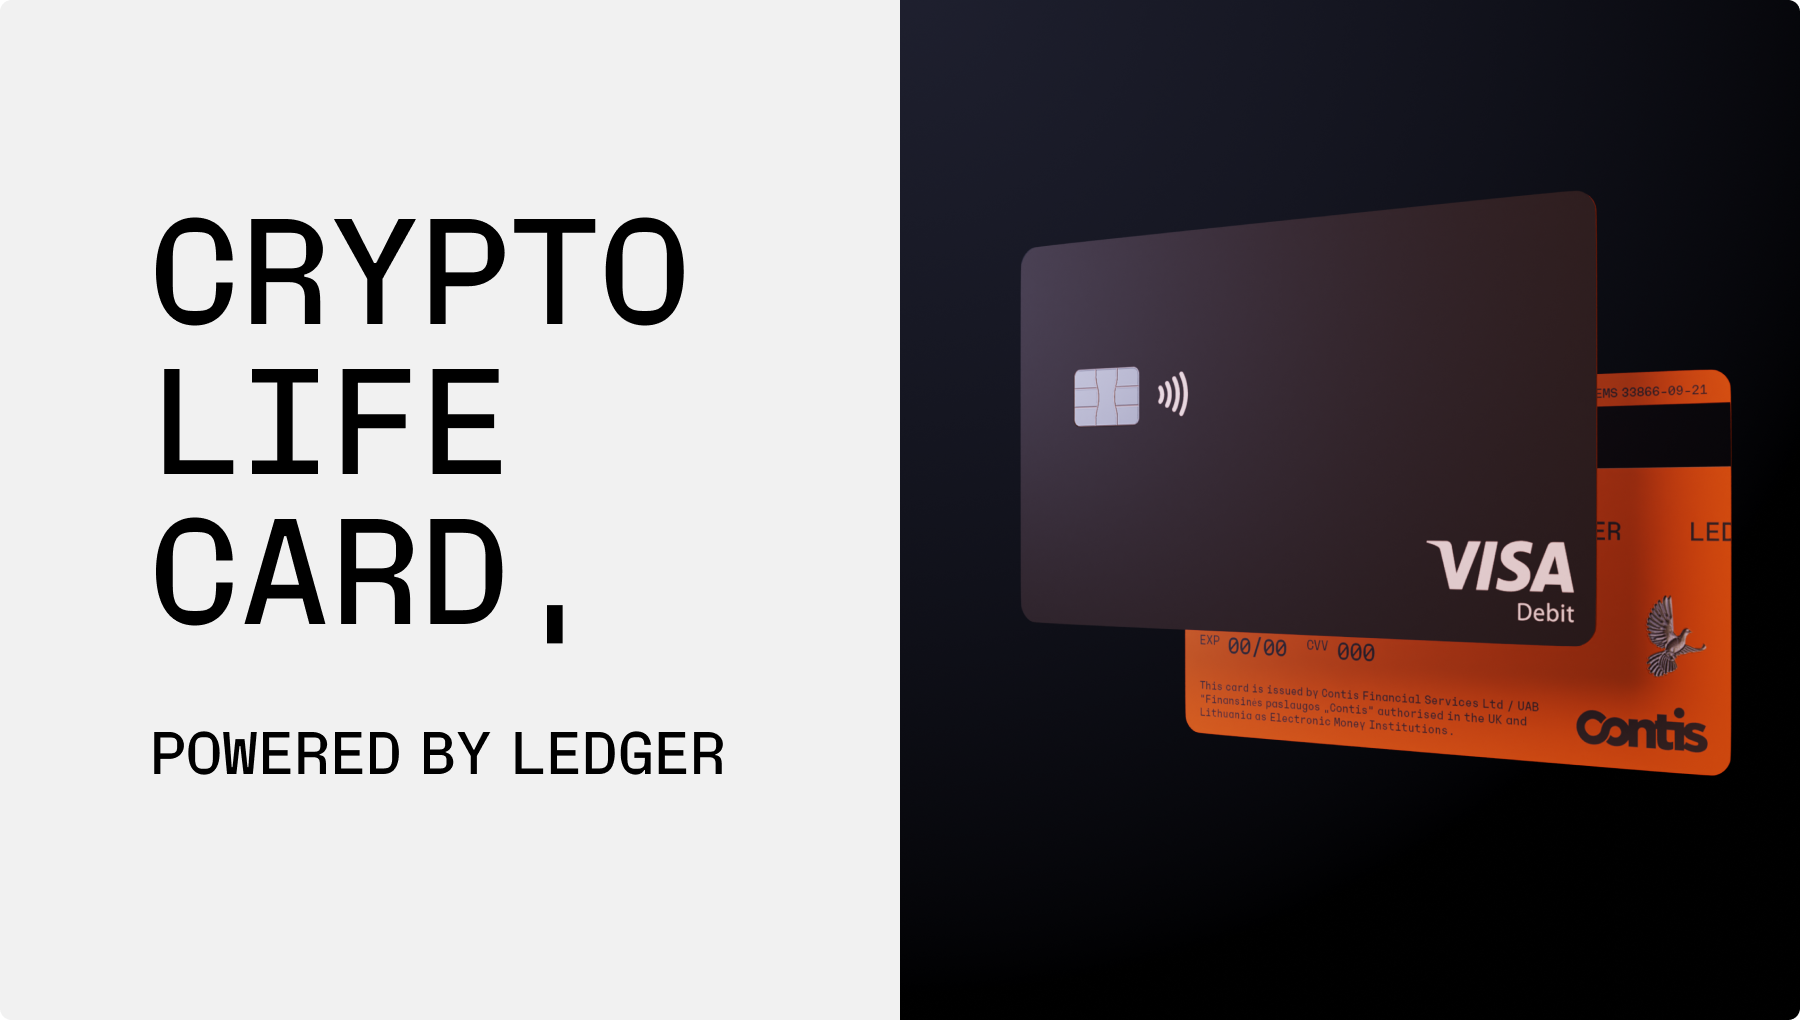 SIGN UP NOW: Our Ledger-powered Crypto Life “CL” Card is coming!